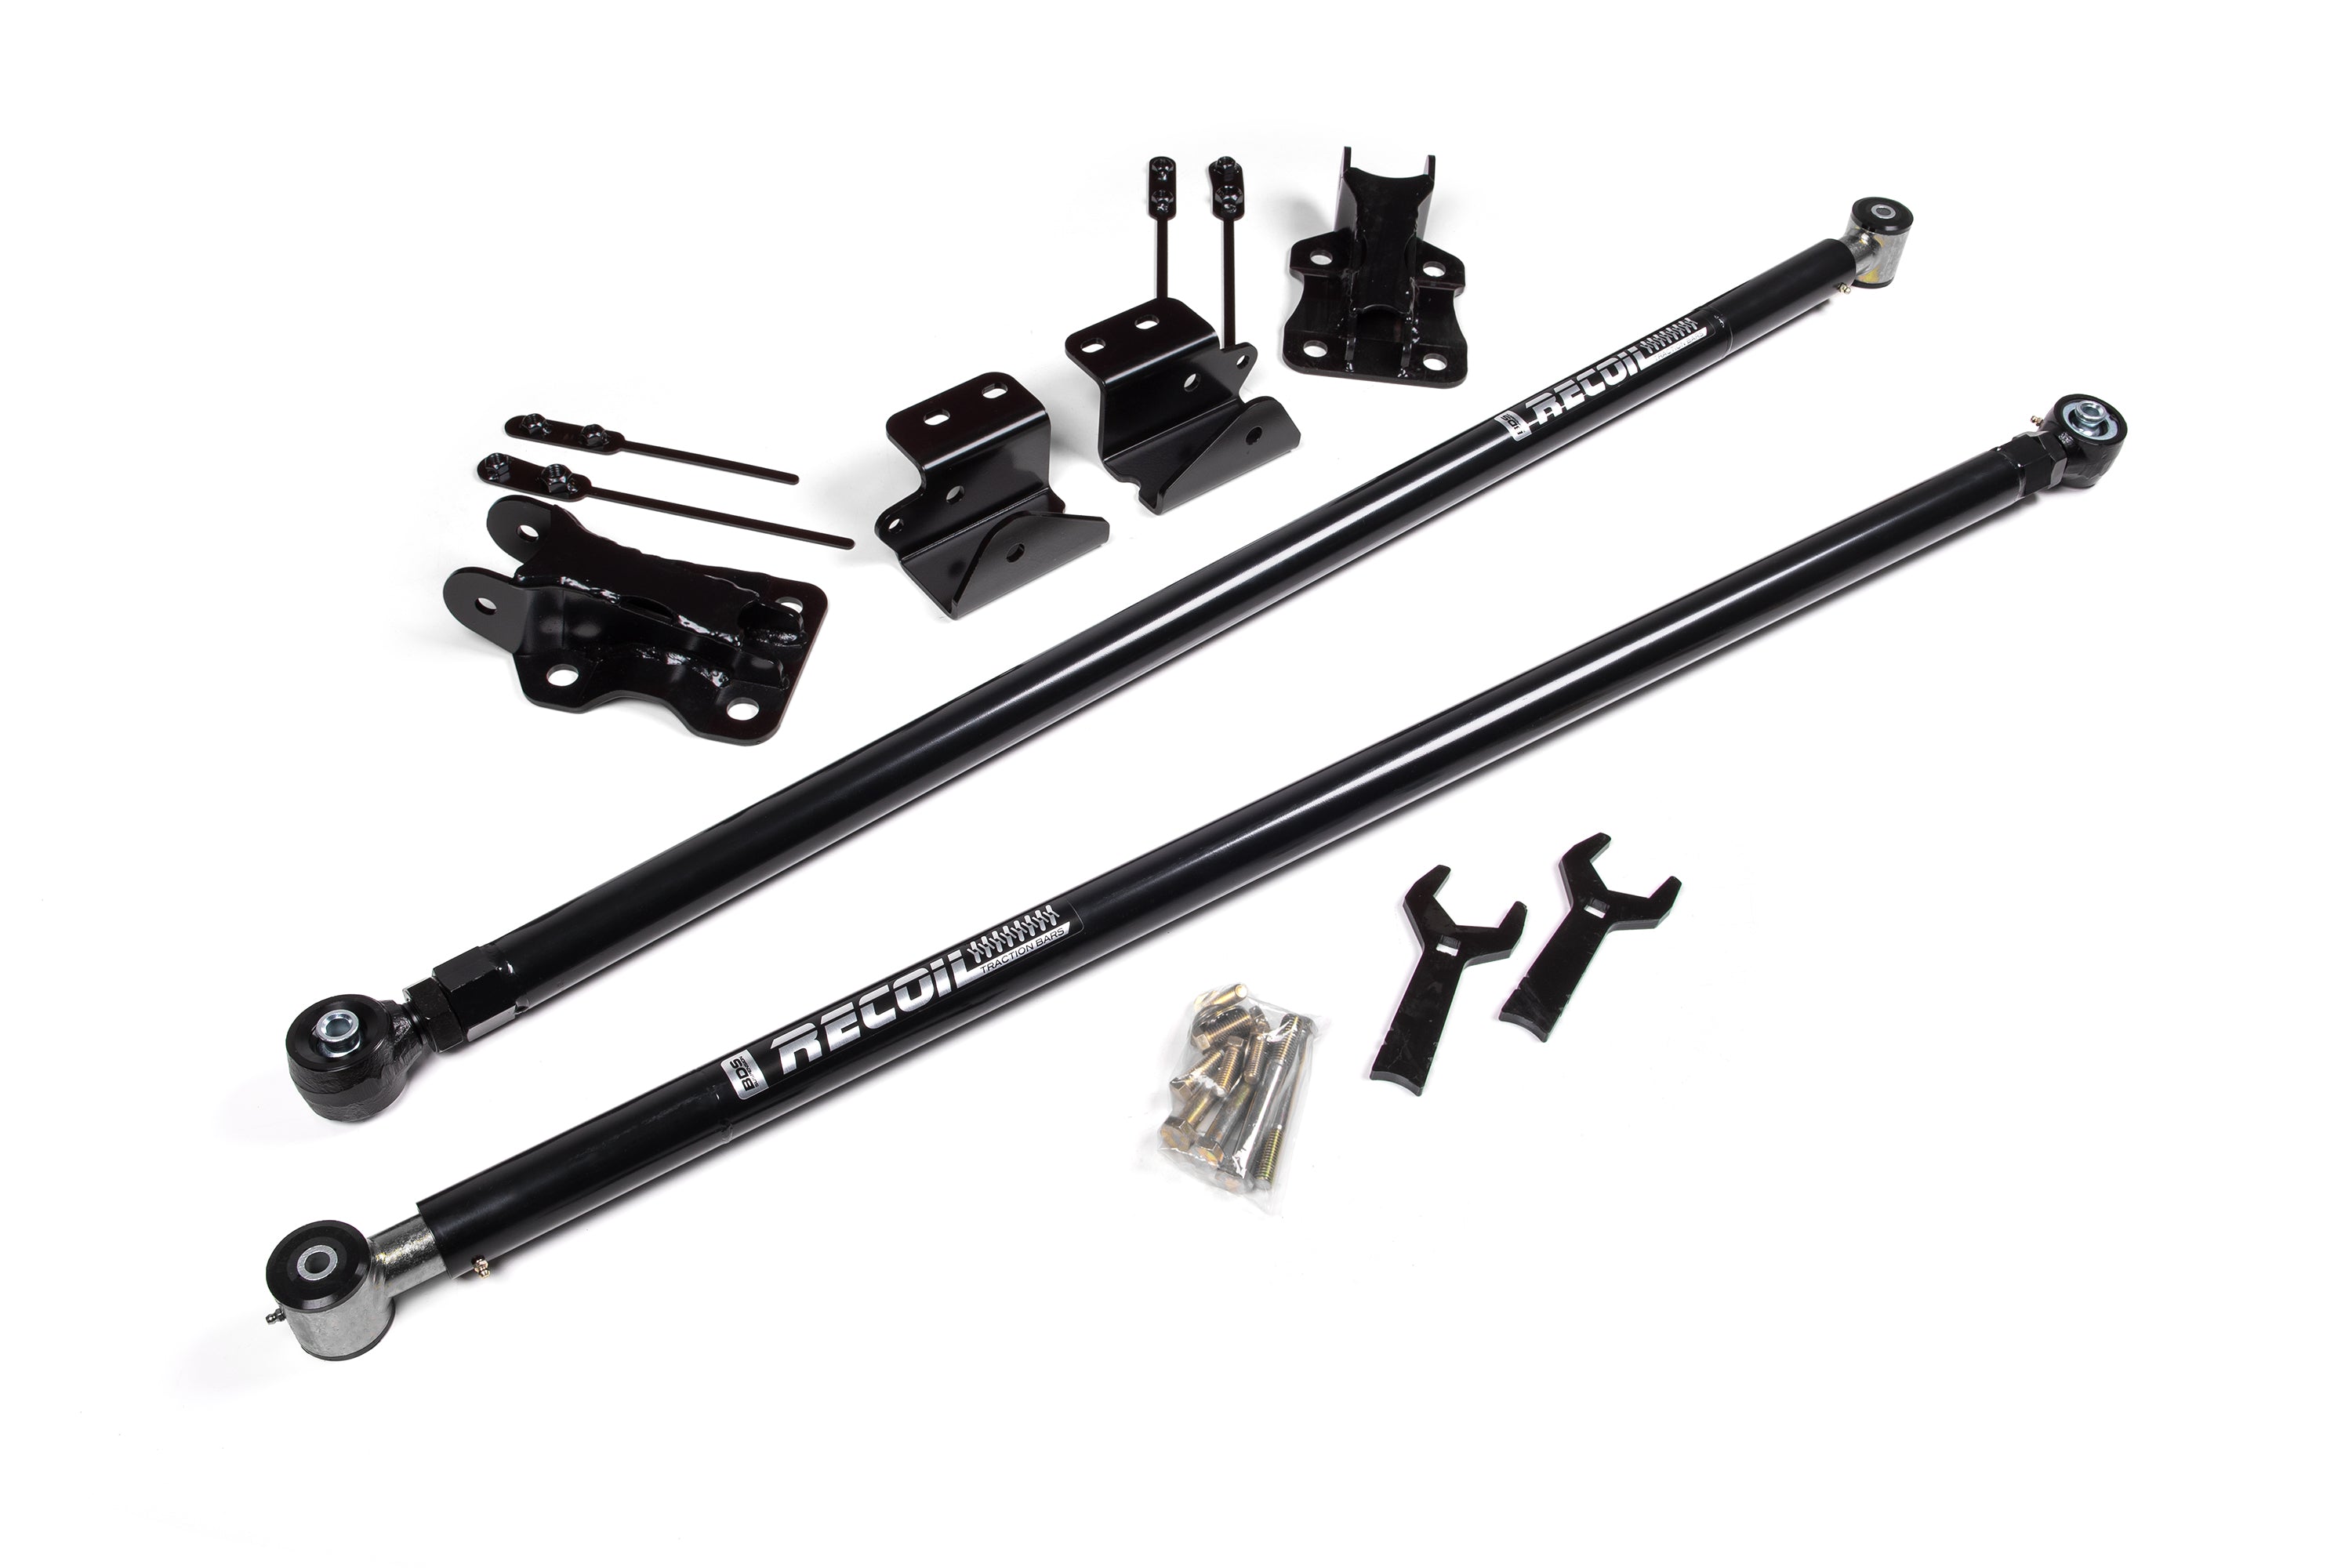 Recoil Traction Bar Kit | Chevy Silverado and GMC Sierra 2500 / 3500 HD (20-24)